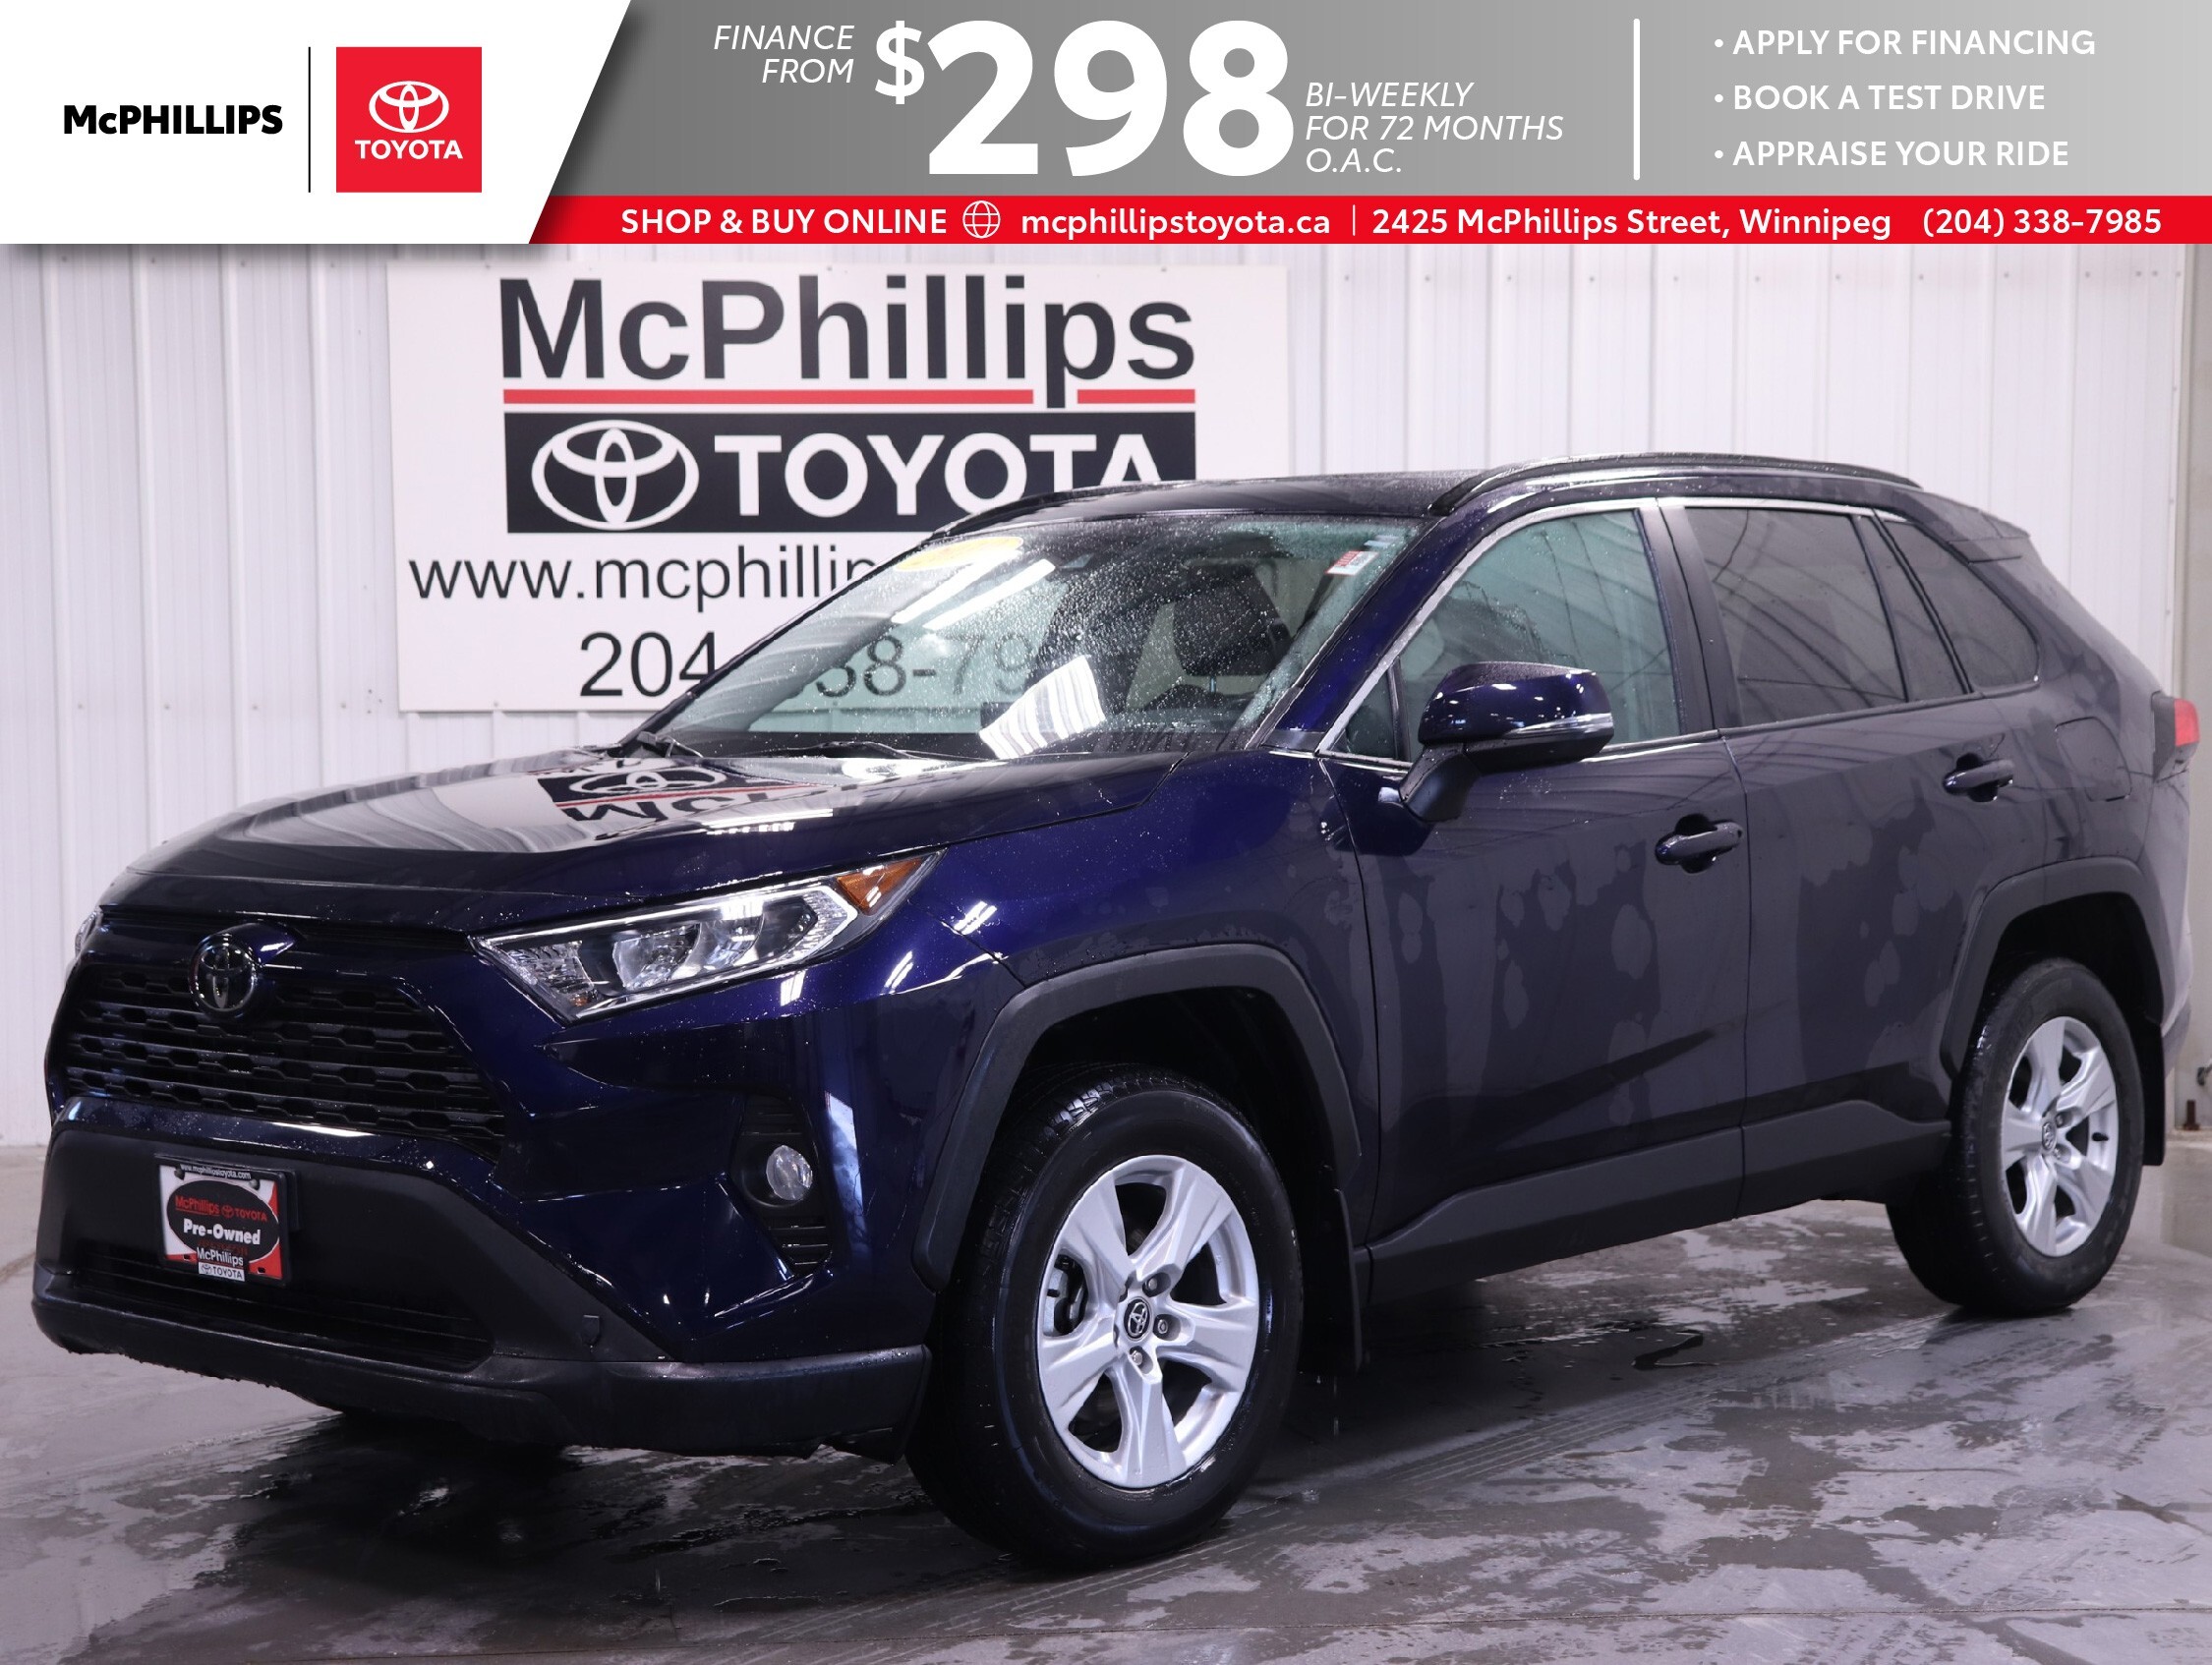 2019 Toyota RAV4 AWD | NO ACCIDENTS | HTD SEATS | PWR LIFTGATE